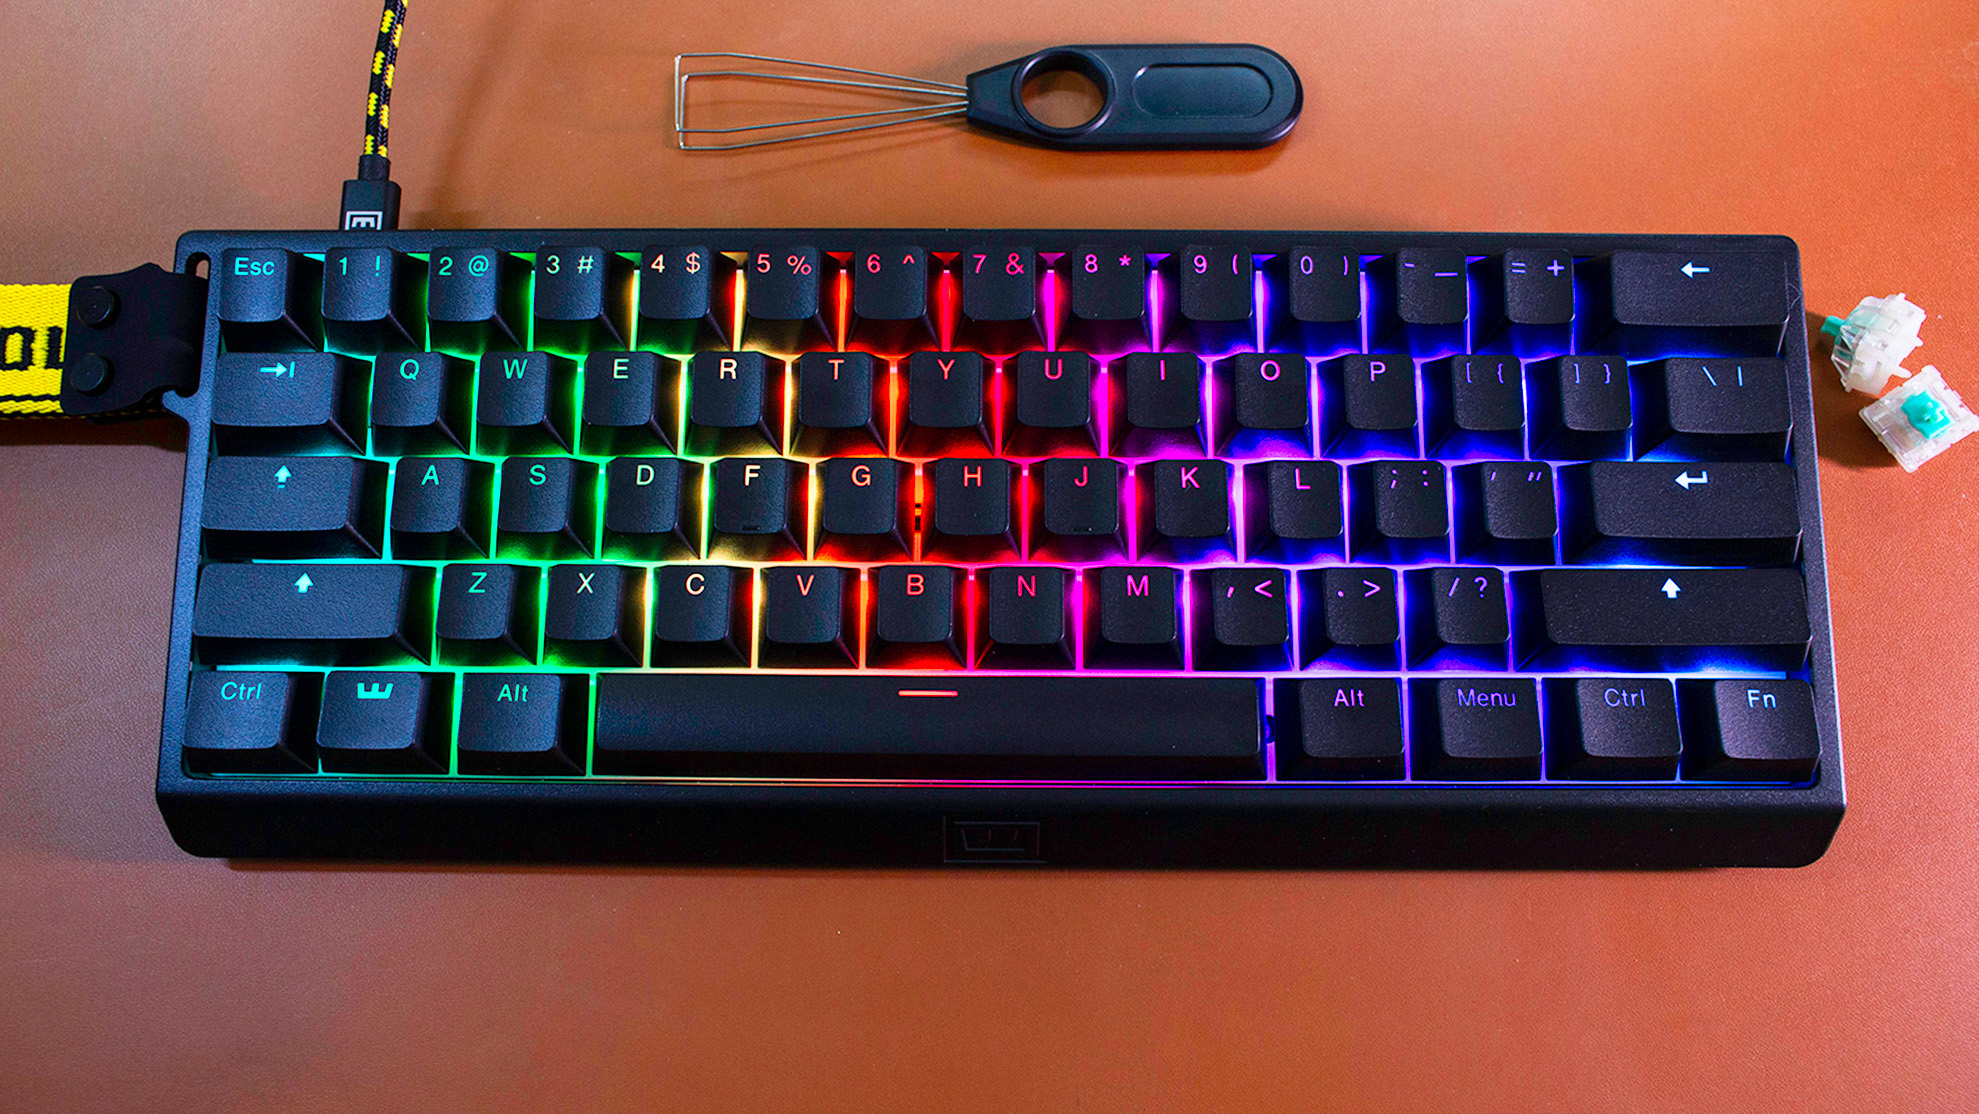 I'm a keyboard enthusiast and this is the best gaming keyboard right now